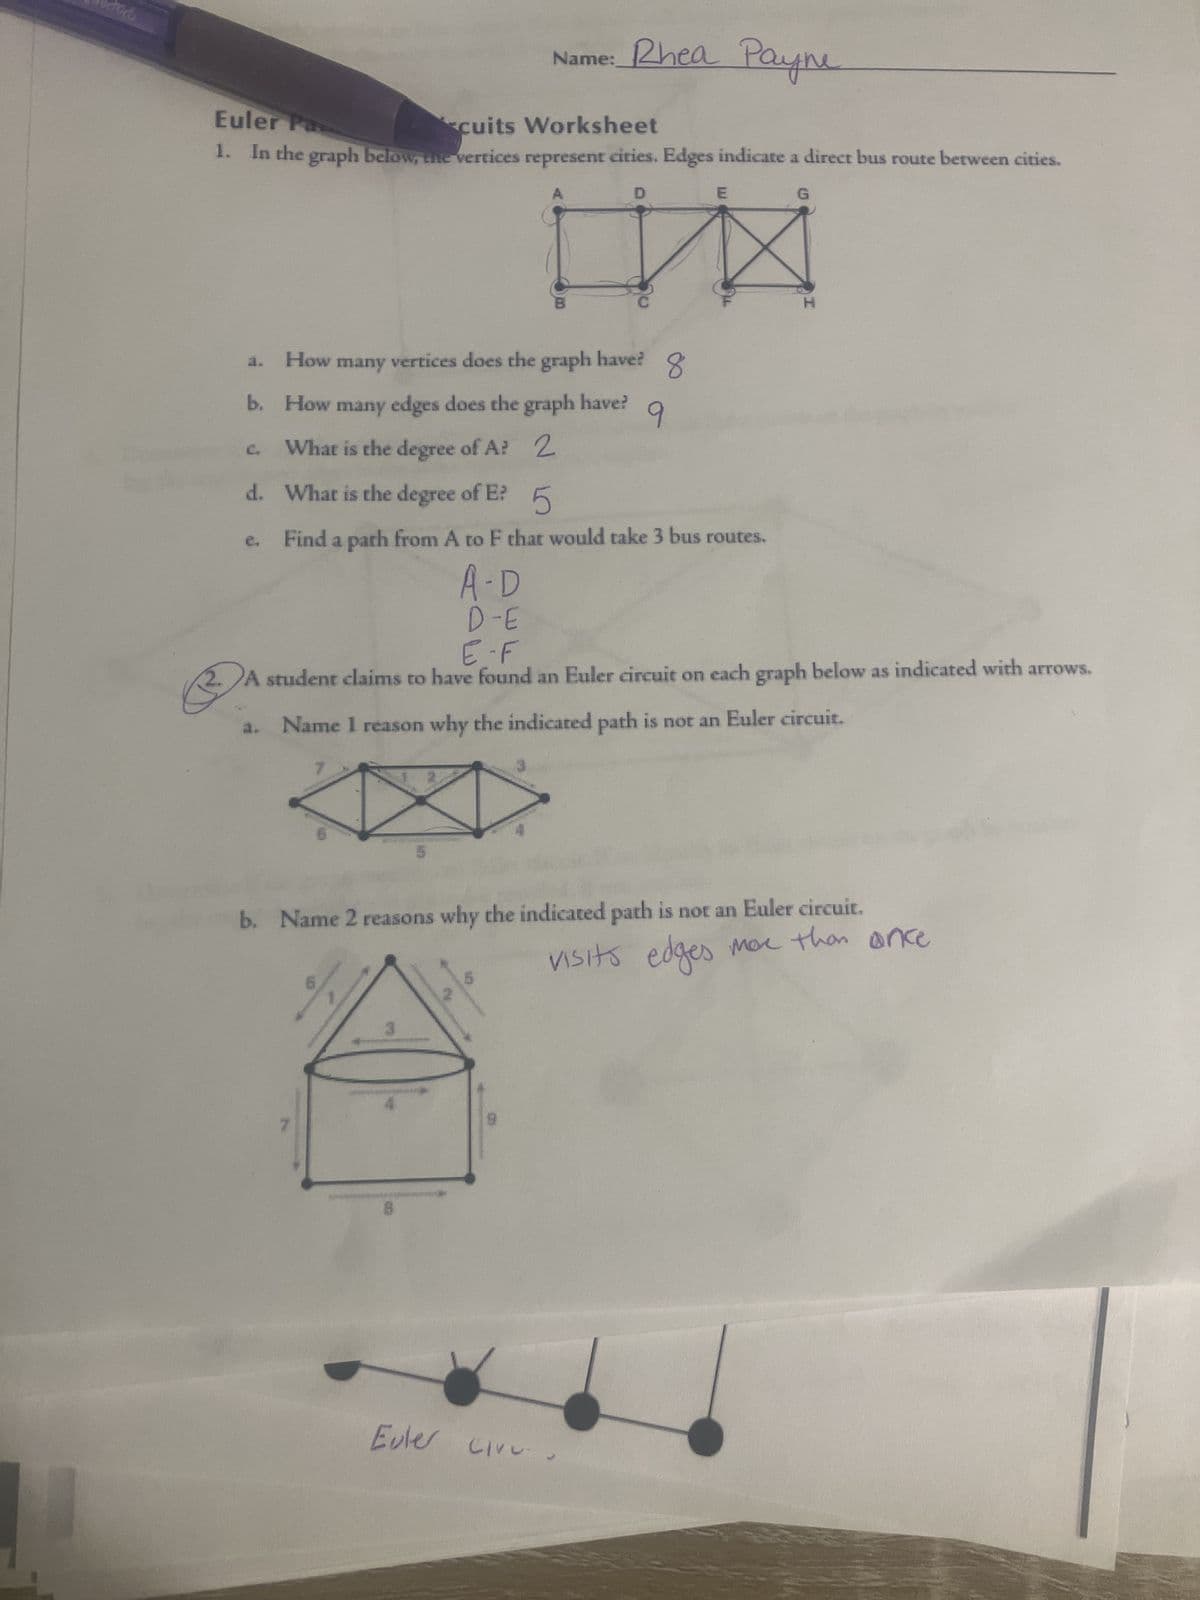 dod
Euler Pa.
Name: Rhea Payne
cuits Worksheet
1. In the graph below, the vertices represent cities. Edges indicate a direct bus route between cities.
D
H
3. How many vertices does the graph have?
b. How many edges does the graph have?
8
9
E
G
b.
C.
What is the degree of A? 2
b
d. What is the degree of E?
Find a path from A to F that would take 3 bus routes.
A-D
D-E
E-F
A student claims to have found an Euler circuit on each graph below as indicated with arrows.
Name 1 reason why the indicated path is not an Euler circuit.
3
5
Name 2 reasons why the indicated path is not an Euler circuit.
5
edges more than once
visits edges
8
2
Euter Liv